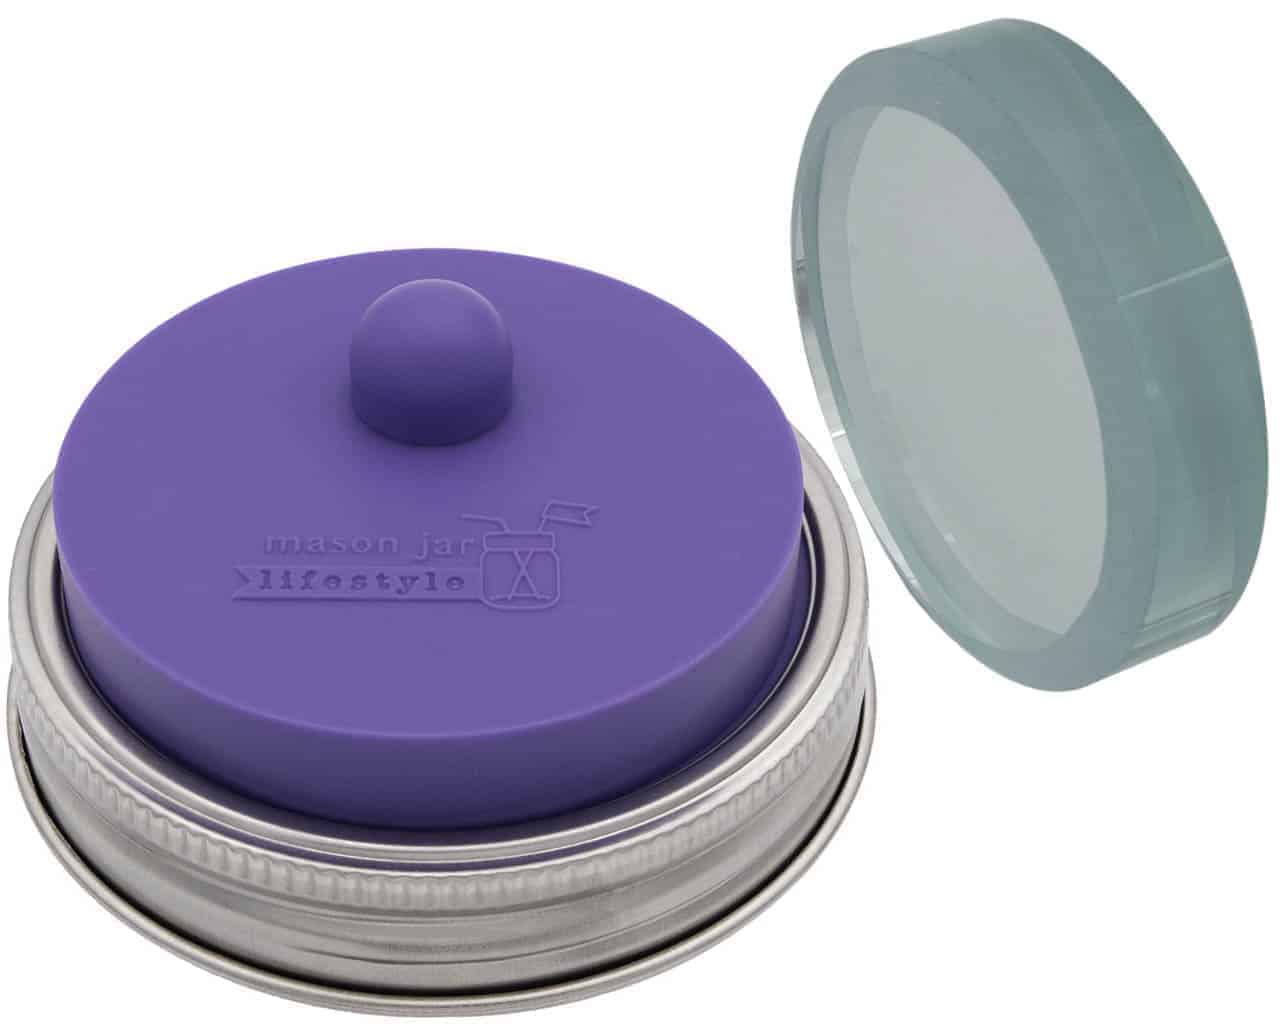 Mason Jar Lifestyle Ultra Violet Fermentation Kit - Single sanded glass fermentation weight plus silicone valve lid for fermenting in wide mouth Mason jars